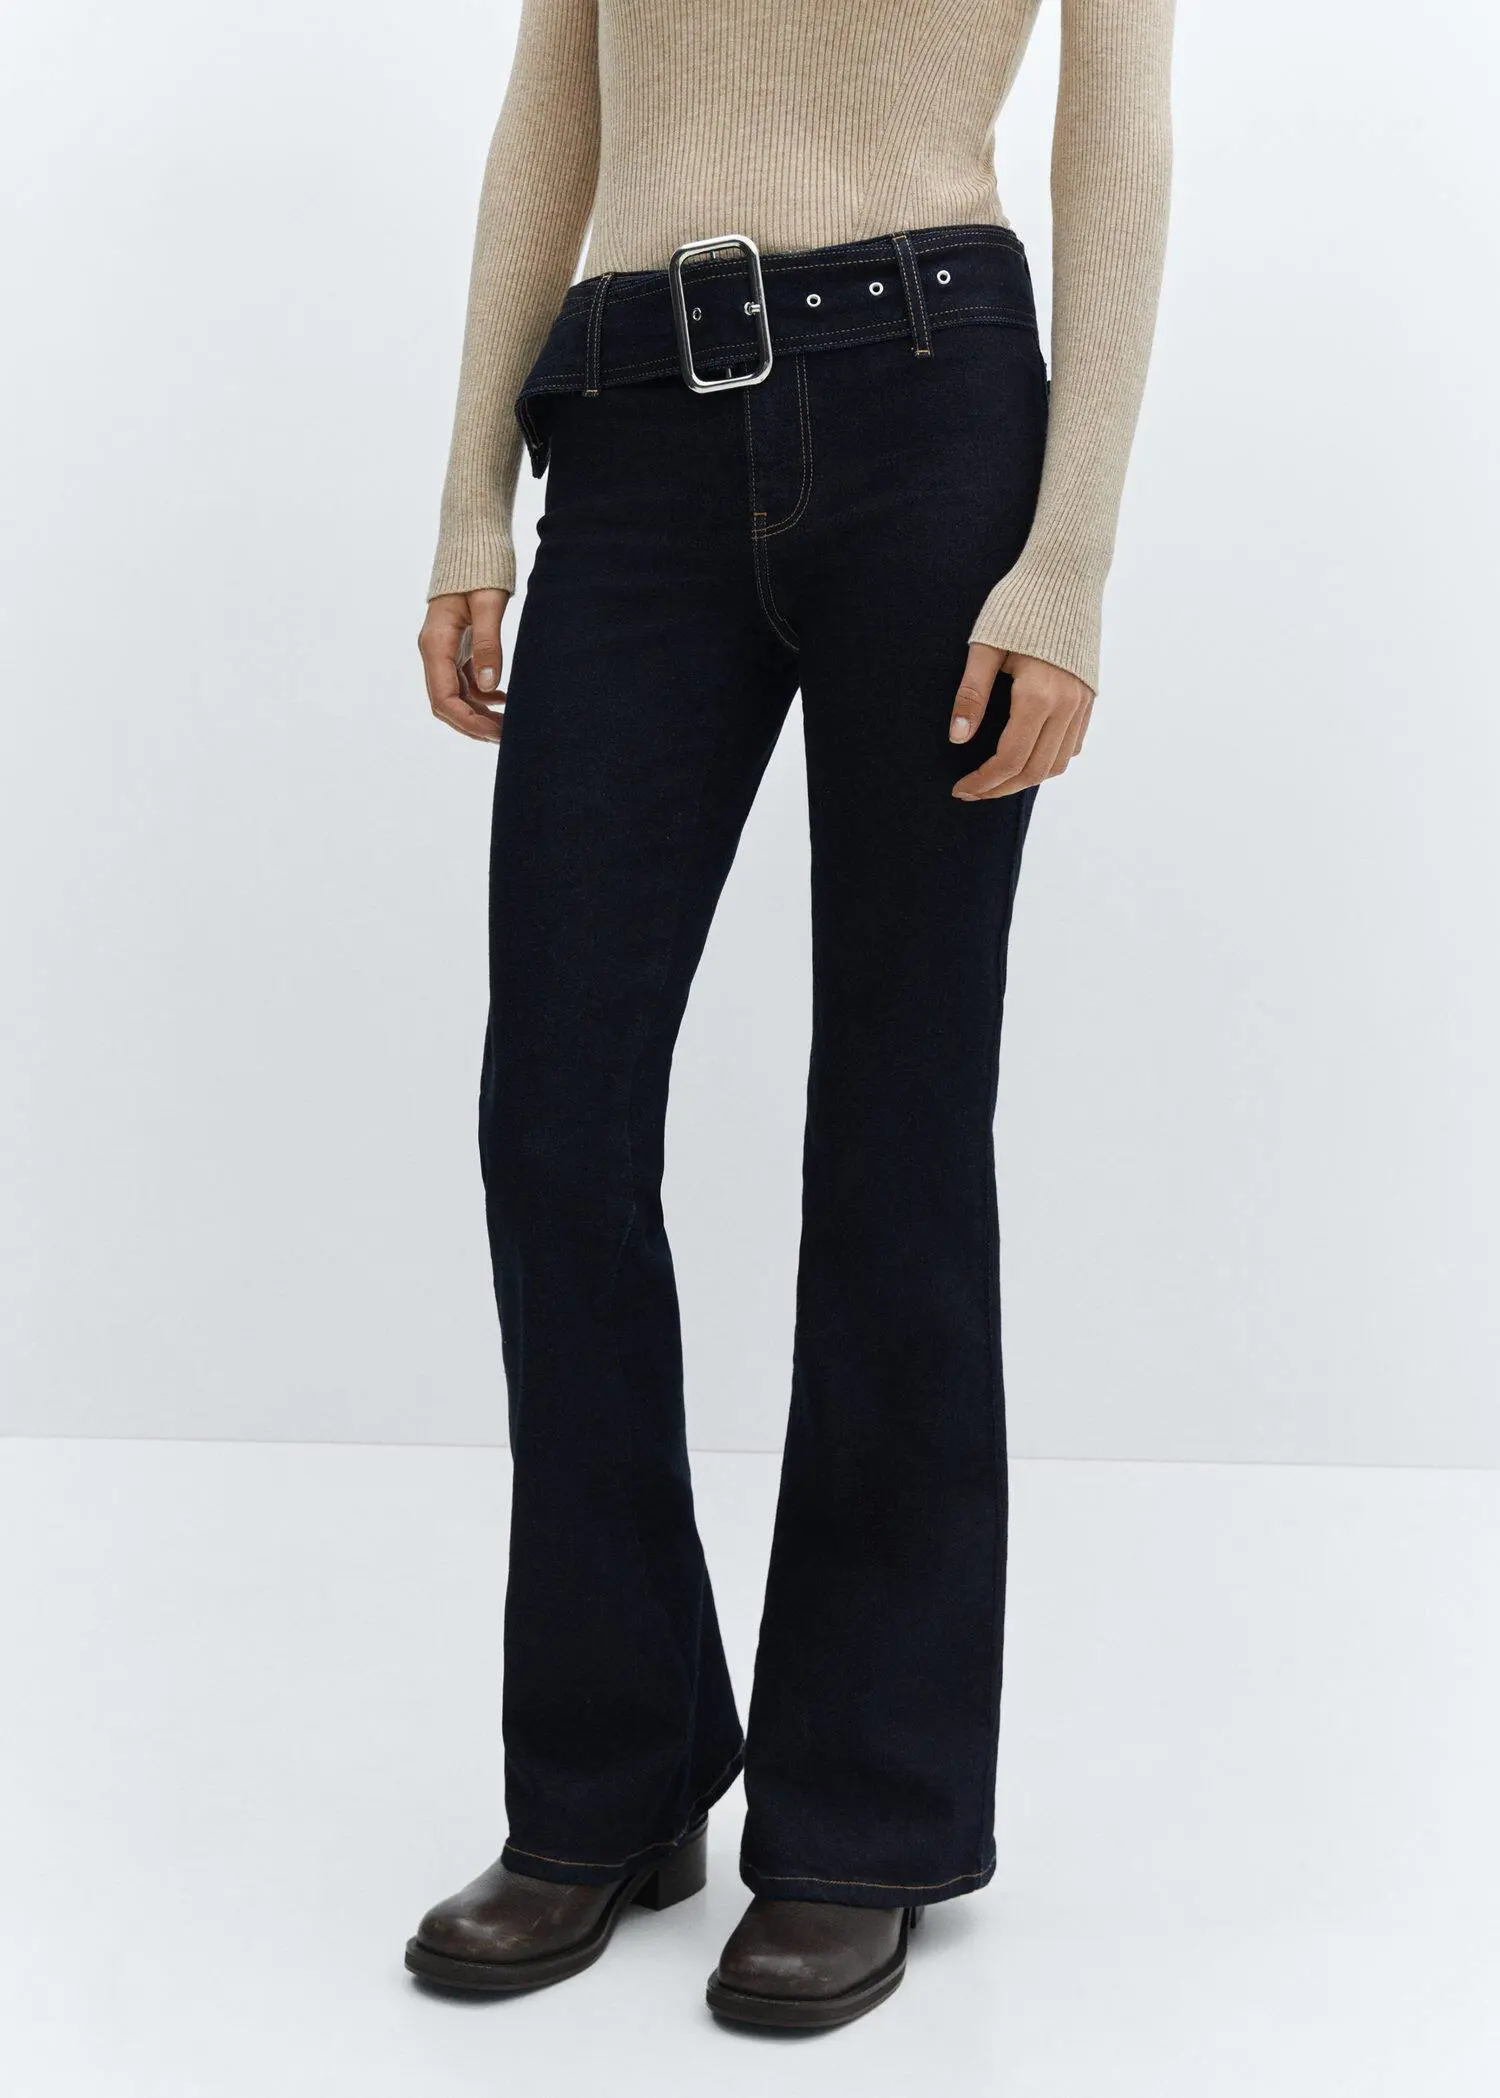 Mango Flared jeans with belt. 2